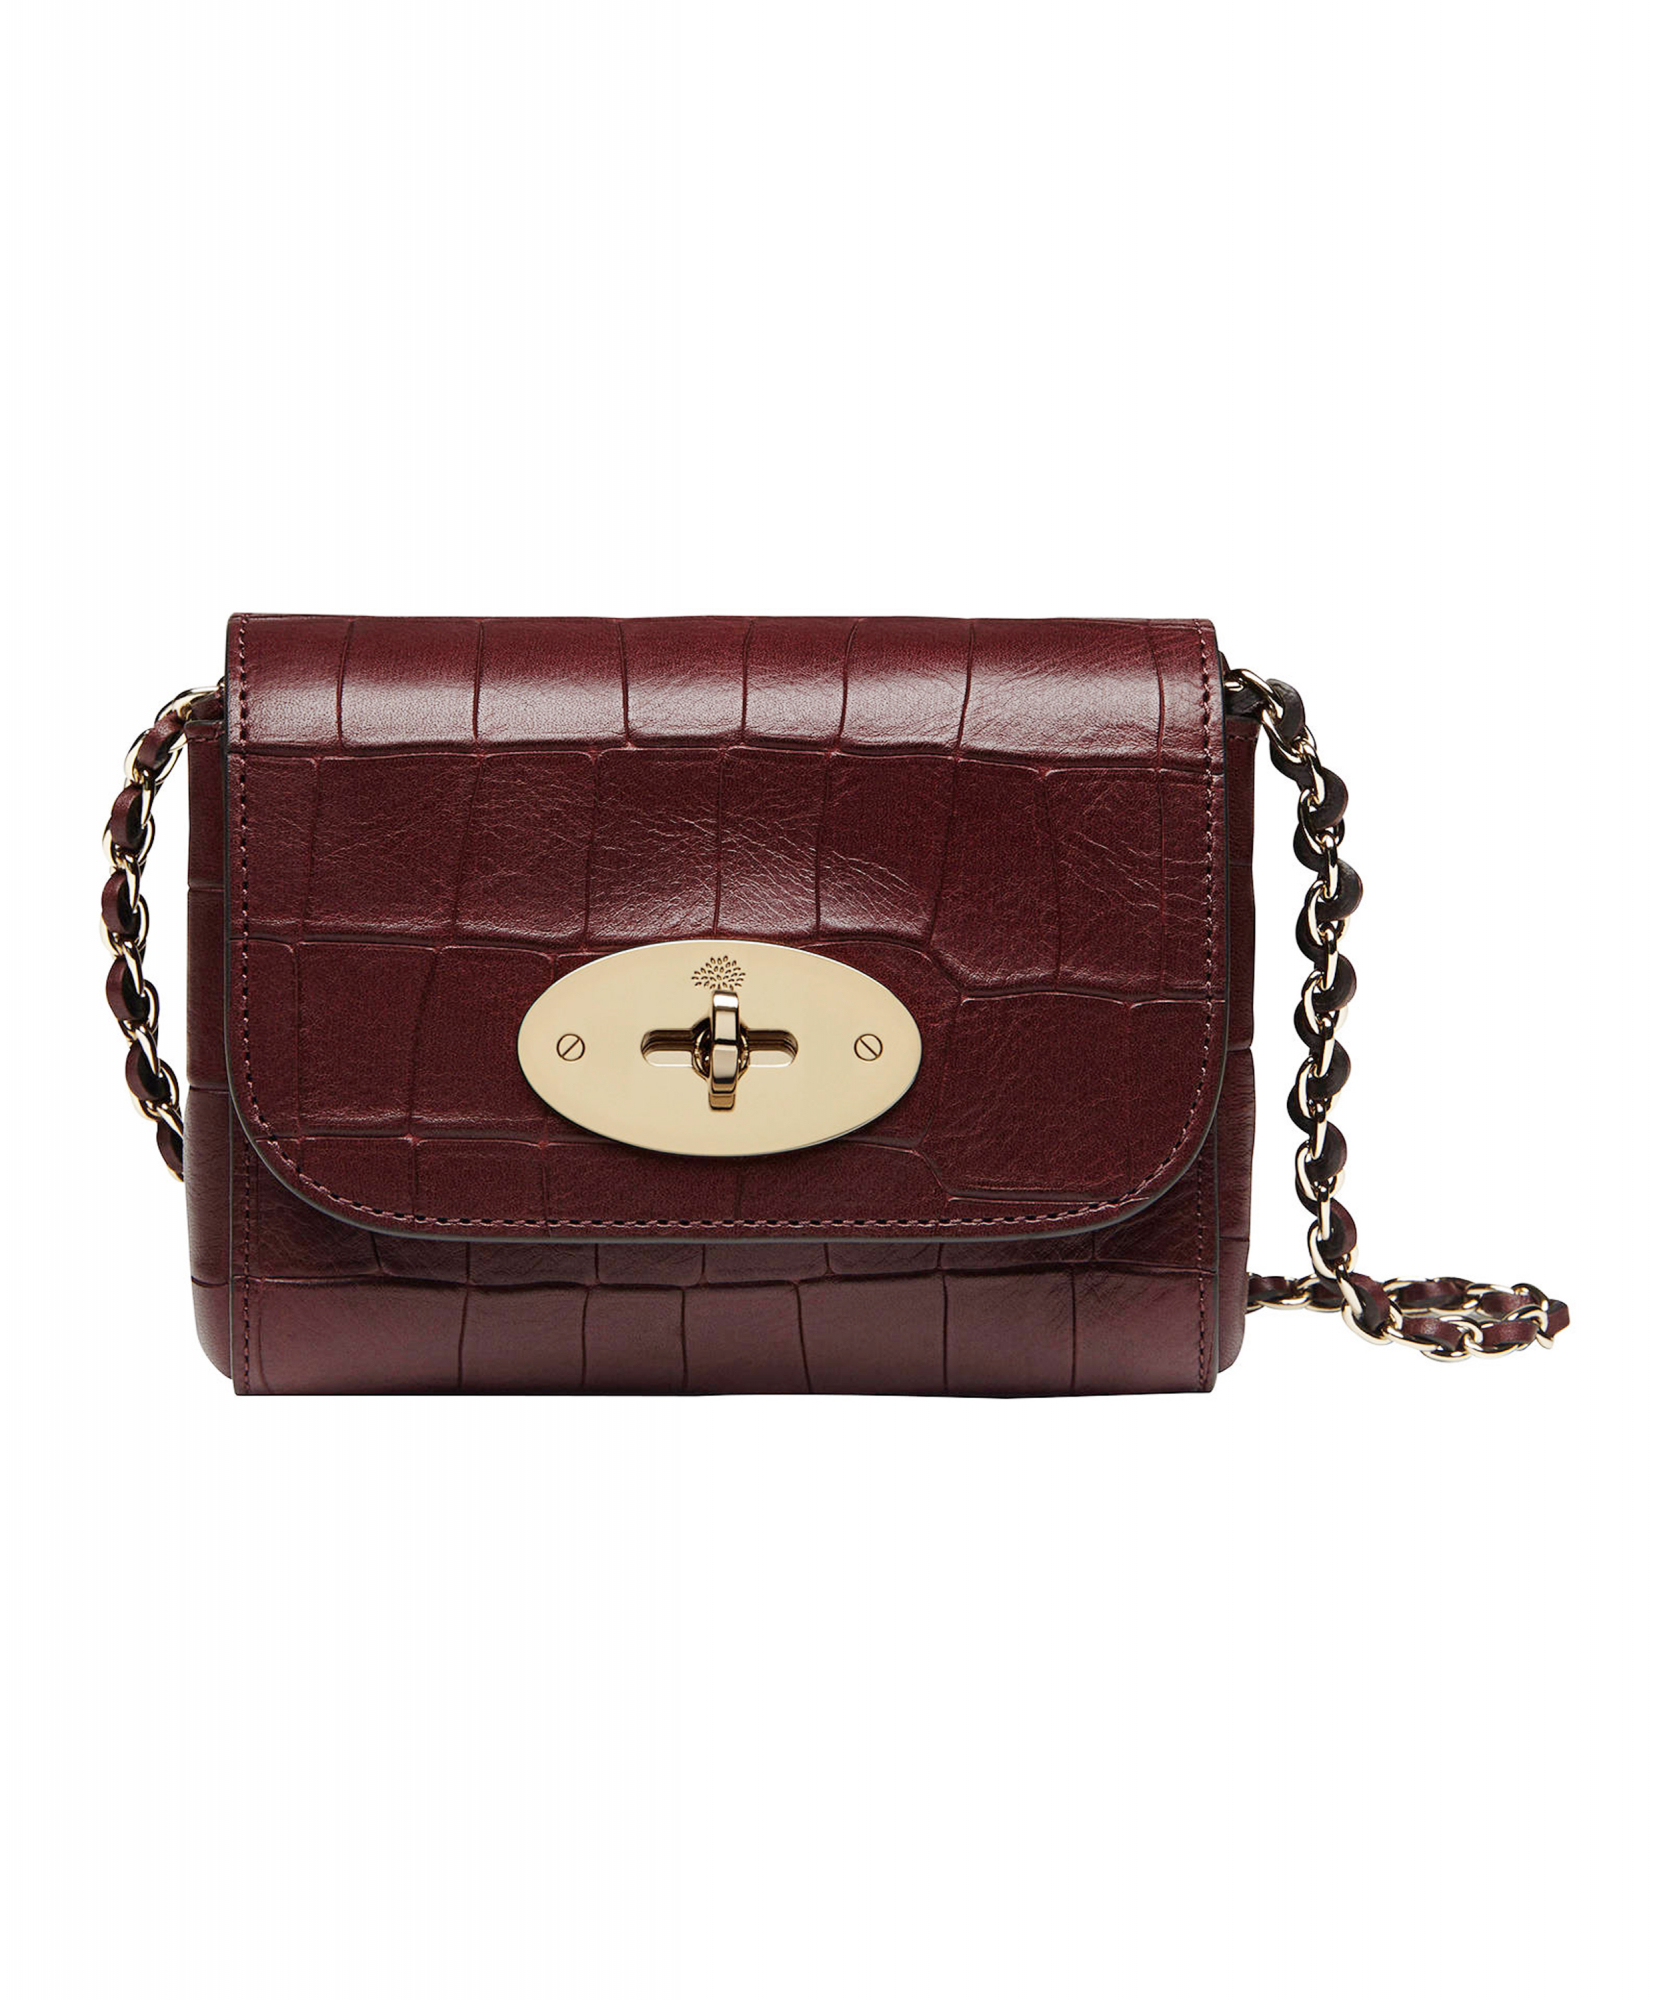 Medium Top Handle Lily | Black Cherry Wrinkly High Shine Leather | Lily |  Mulberry